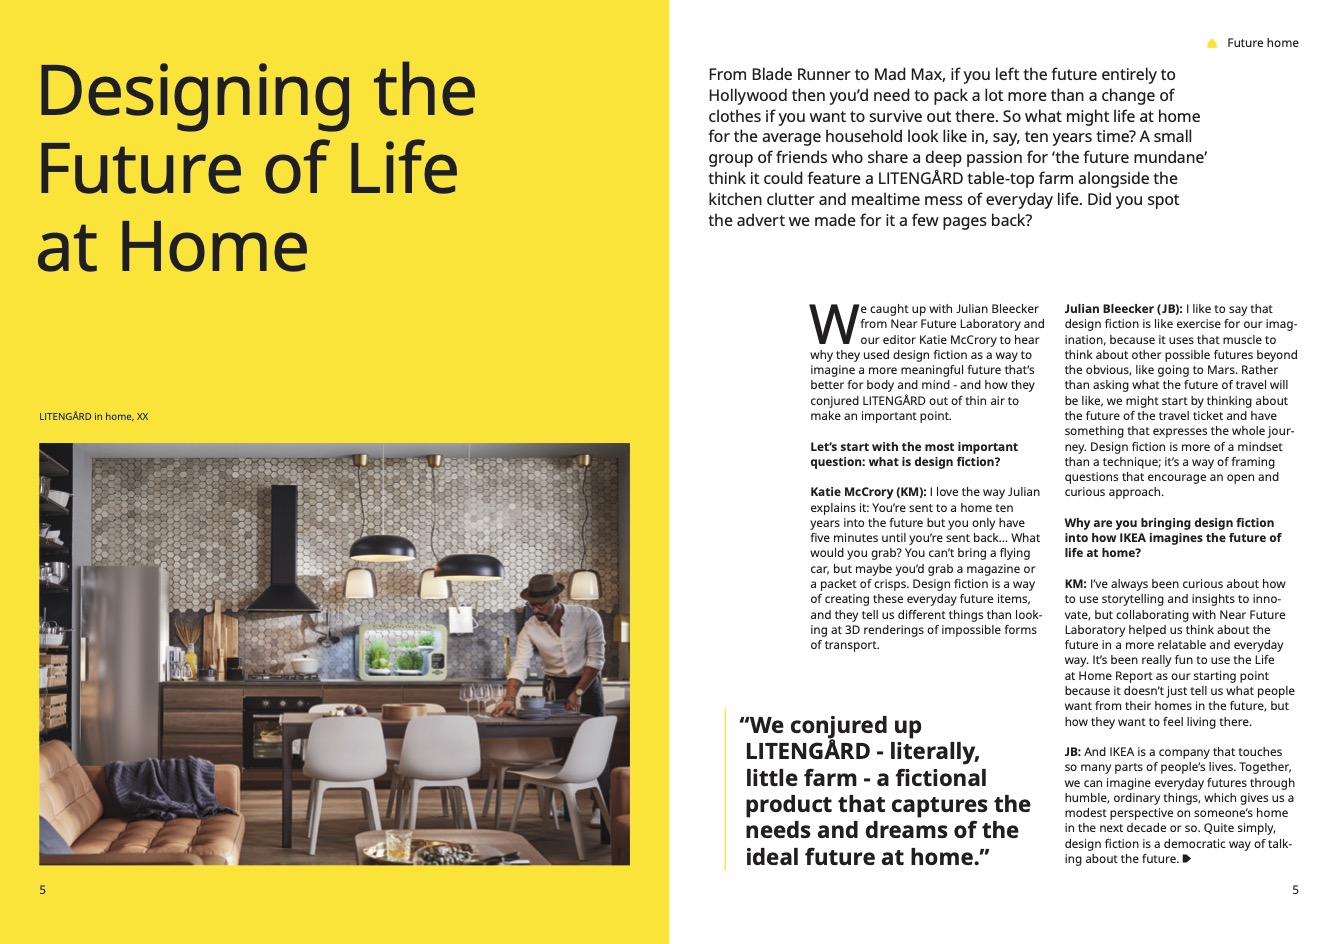 A spread from Ikea Life at Home Report Magazine featuring a conversation between Julian Bleecker and Katie McCrory about Design Fiction